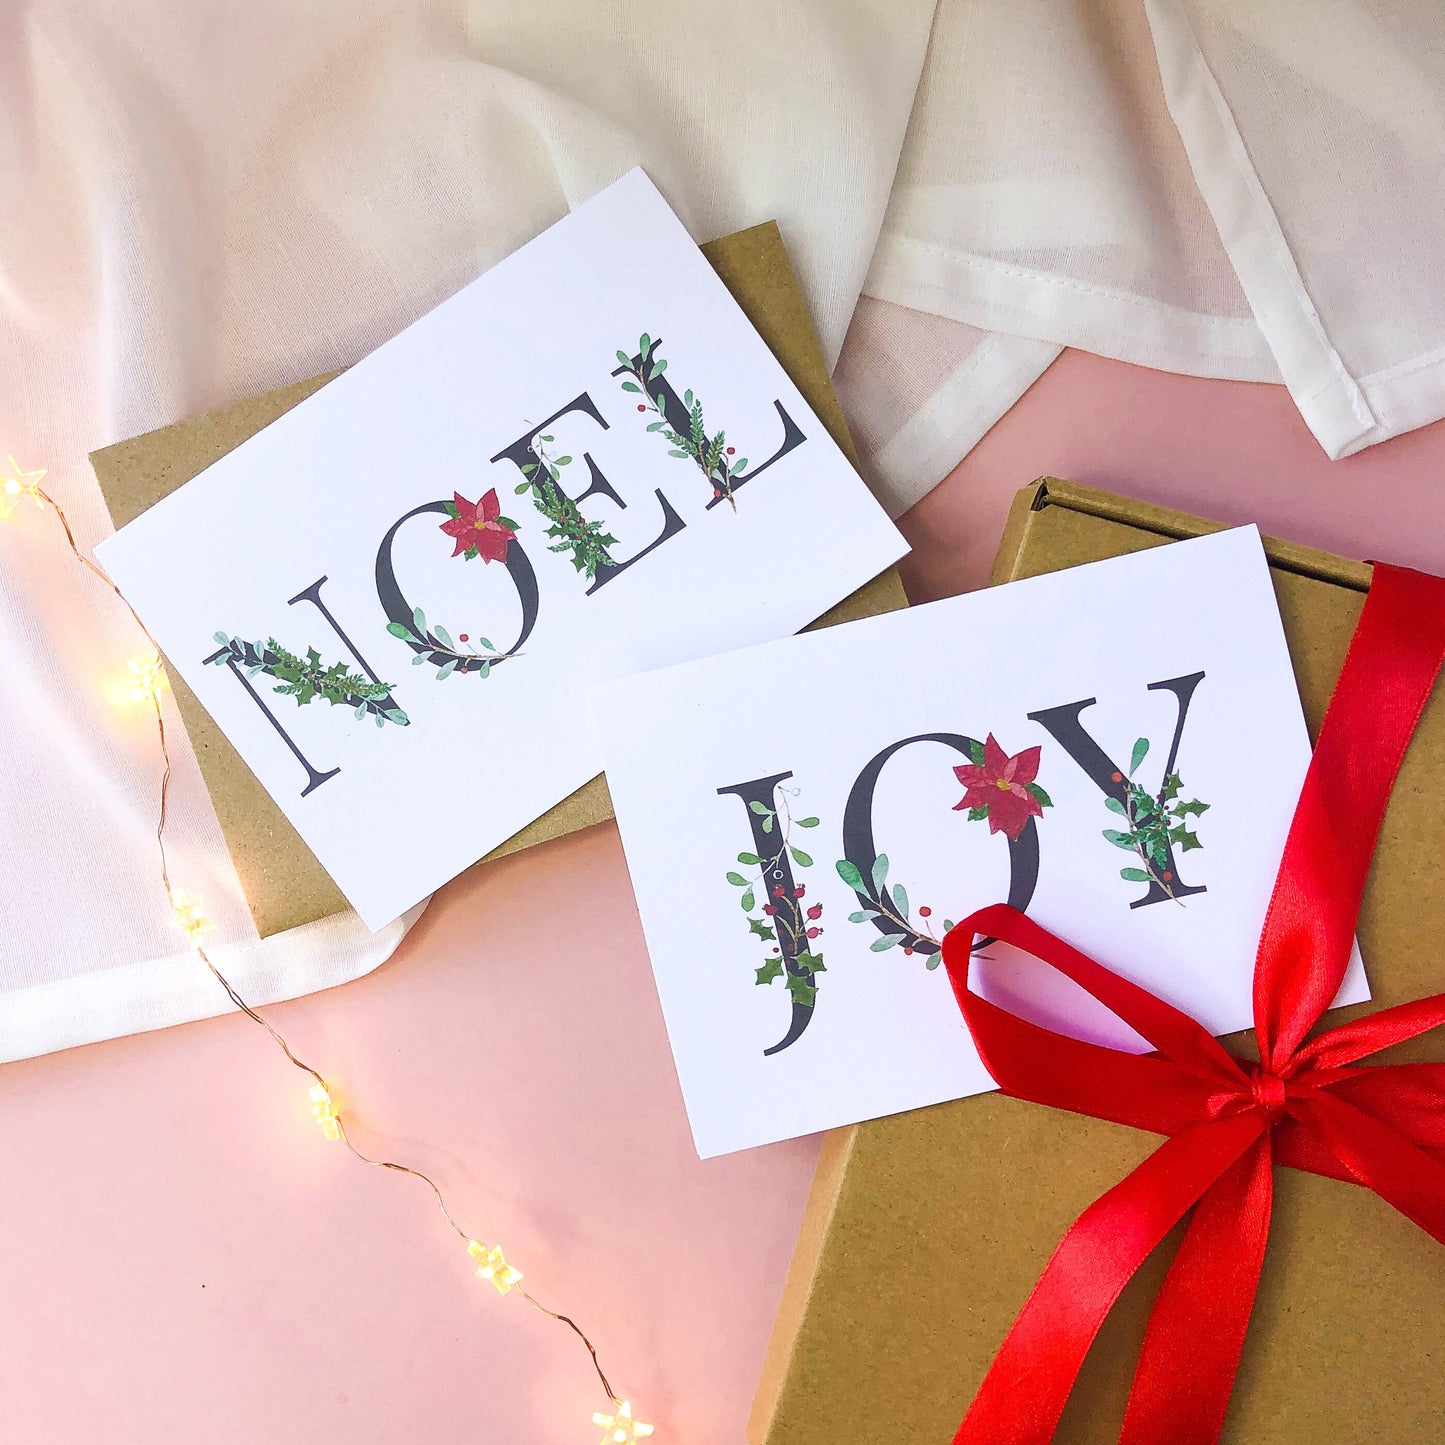 Choose any 5 Christmas cards